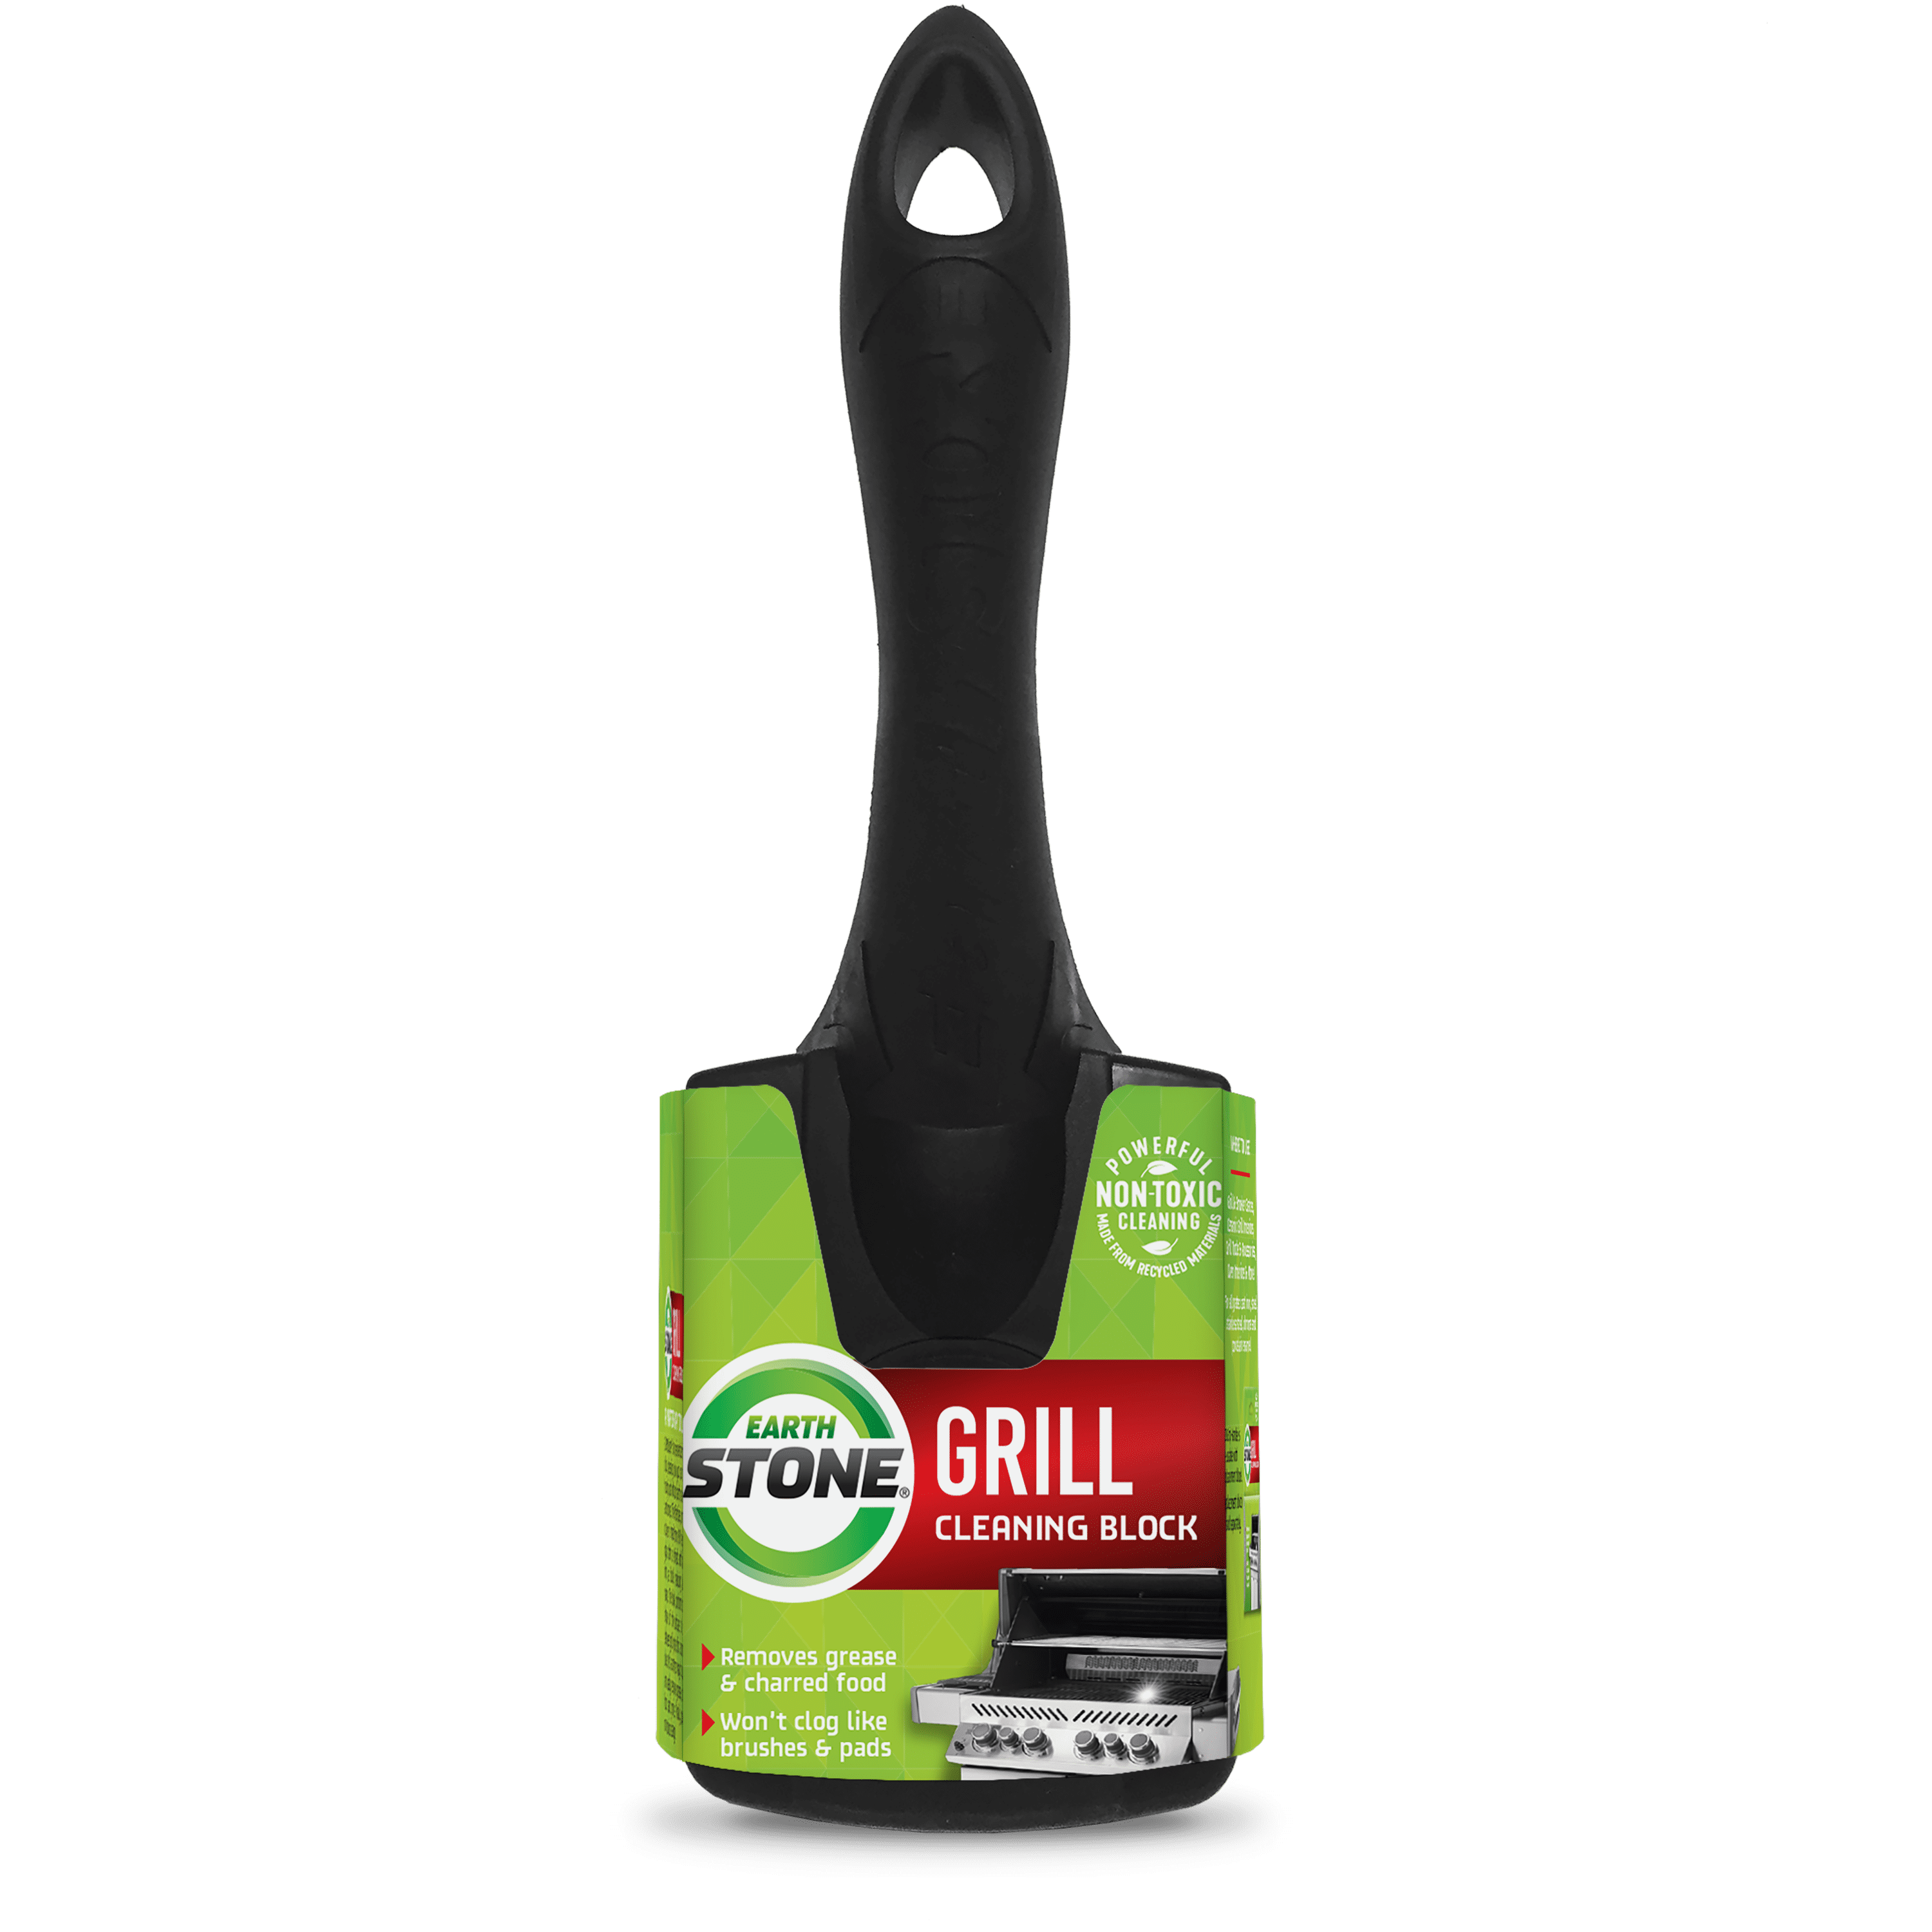 EarthStone Grill Cleaning Block with EZ-Grip Handle